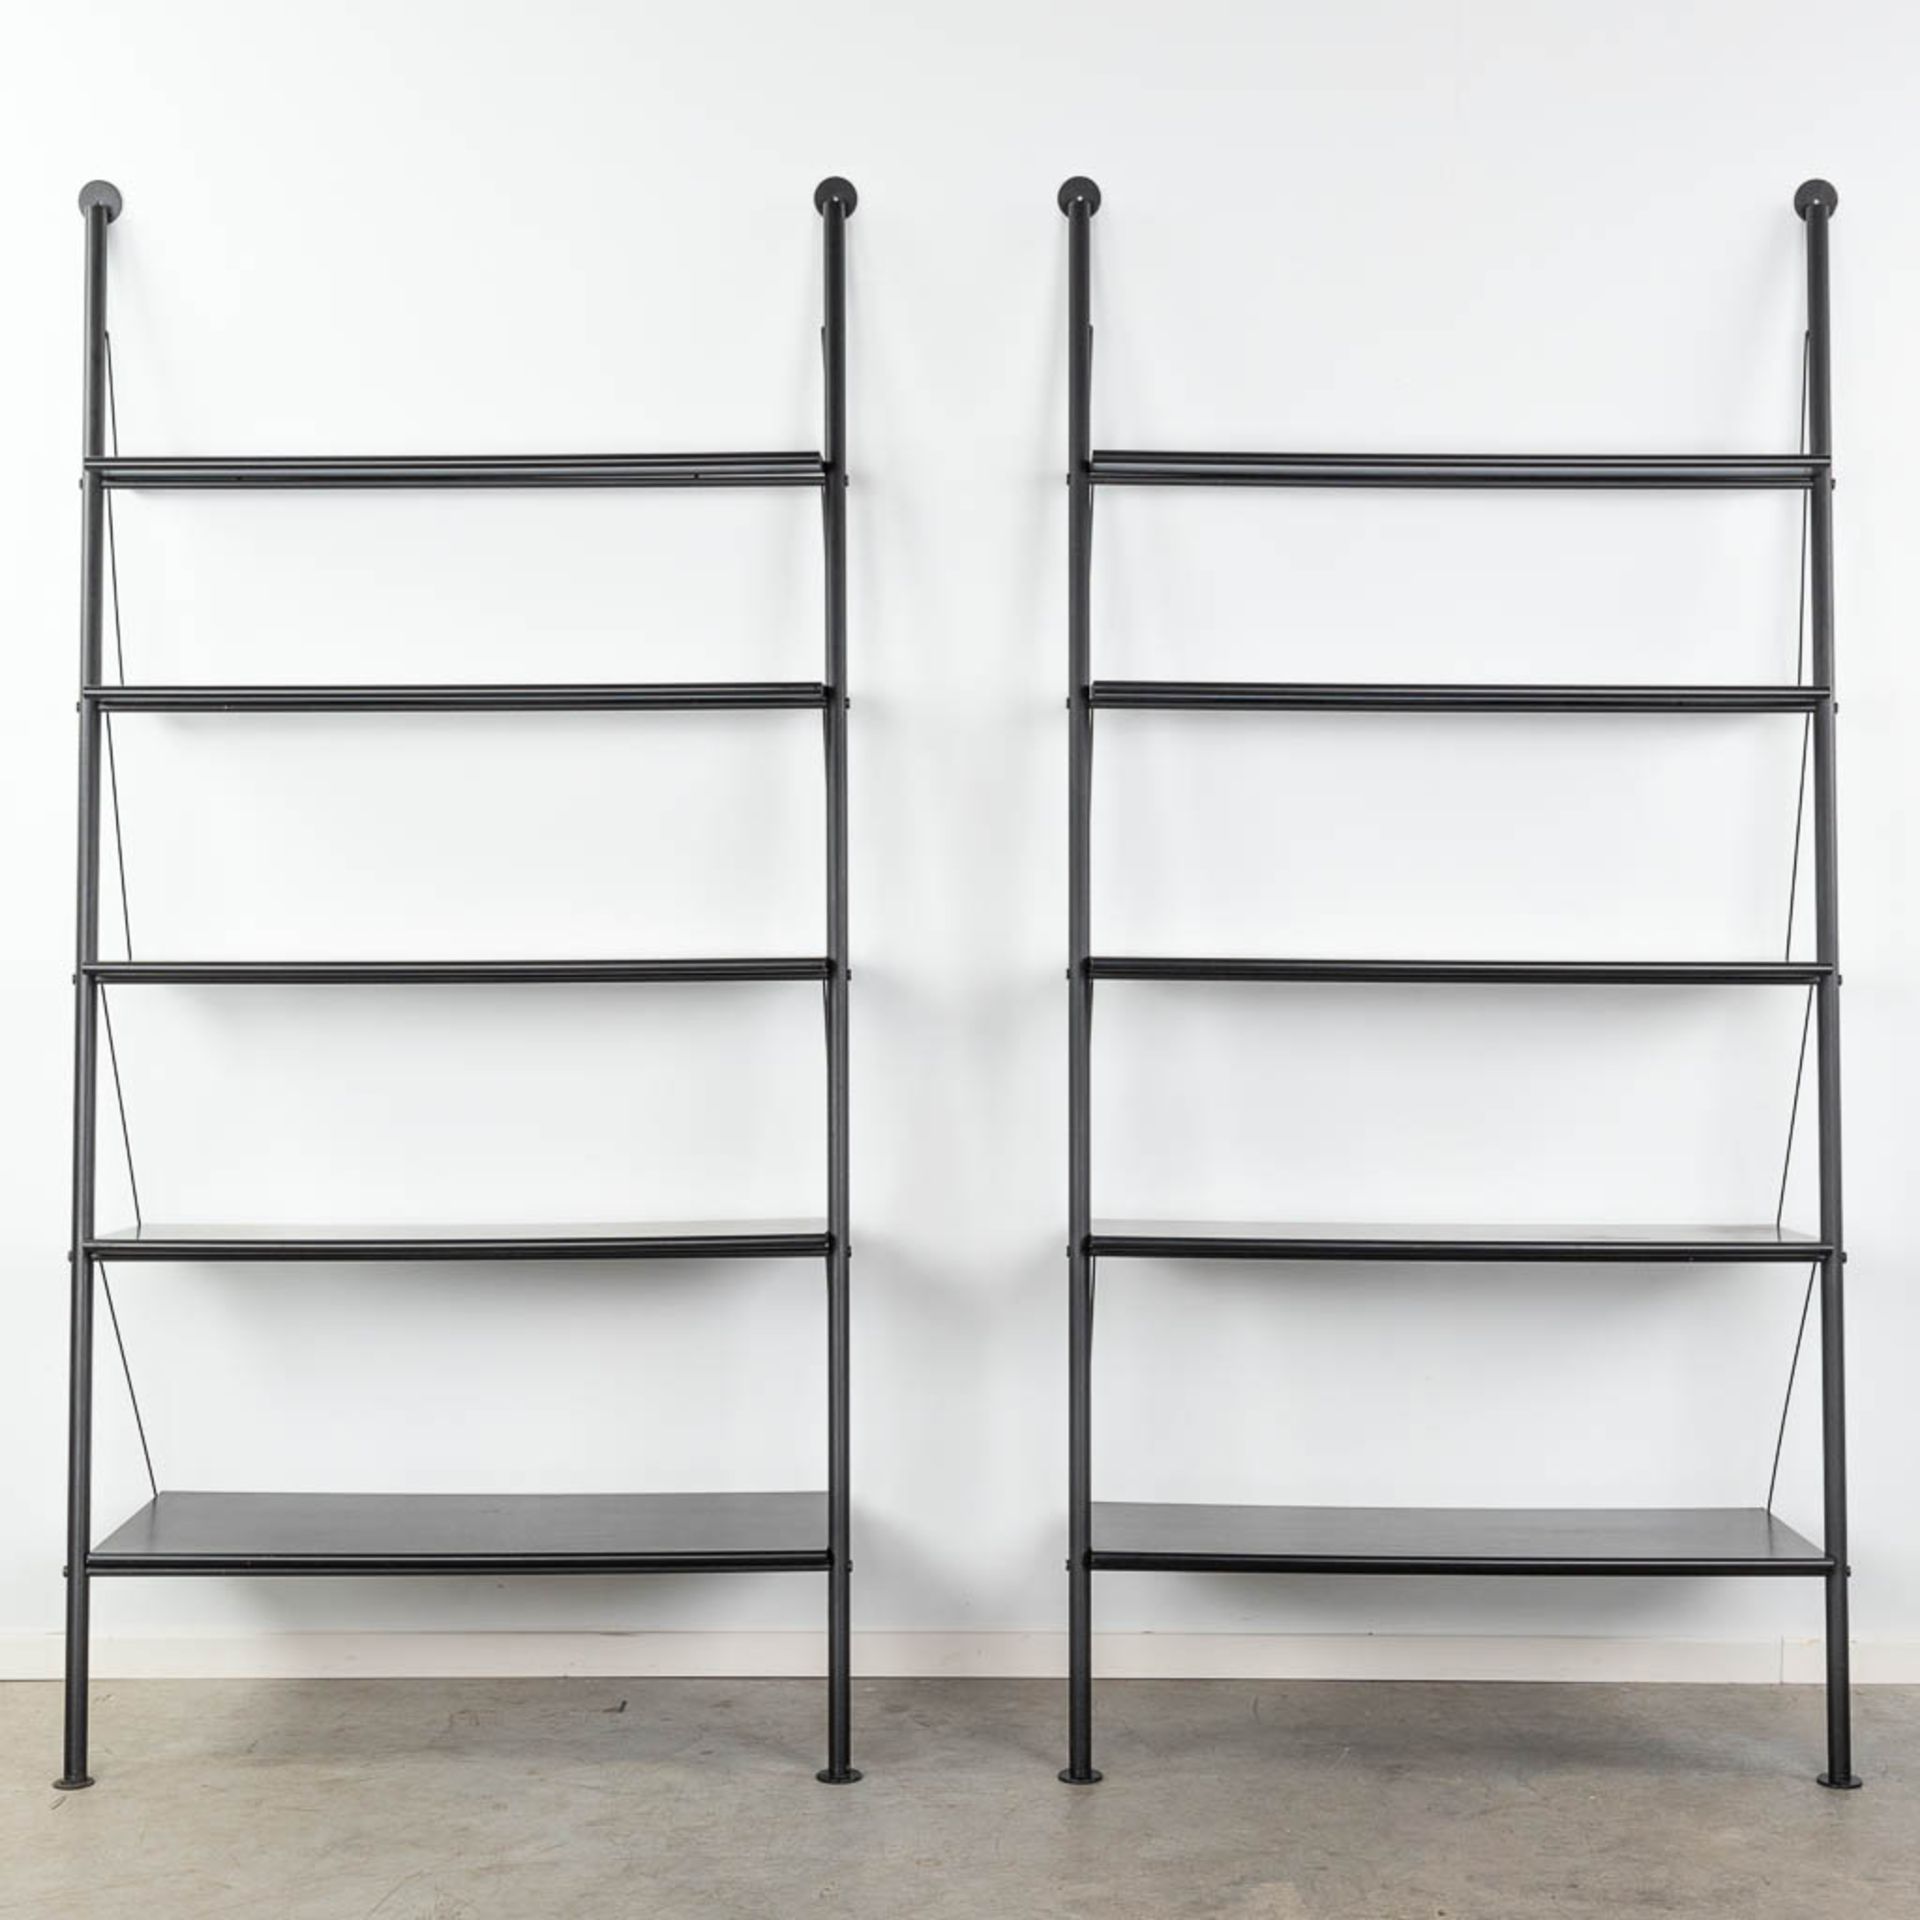 Philippe STARCK (1949) 'John LLD' two wall units, metal and wood. (D:50 x W:110 x H:218 cm) - Image 13 of 16